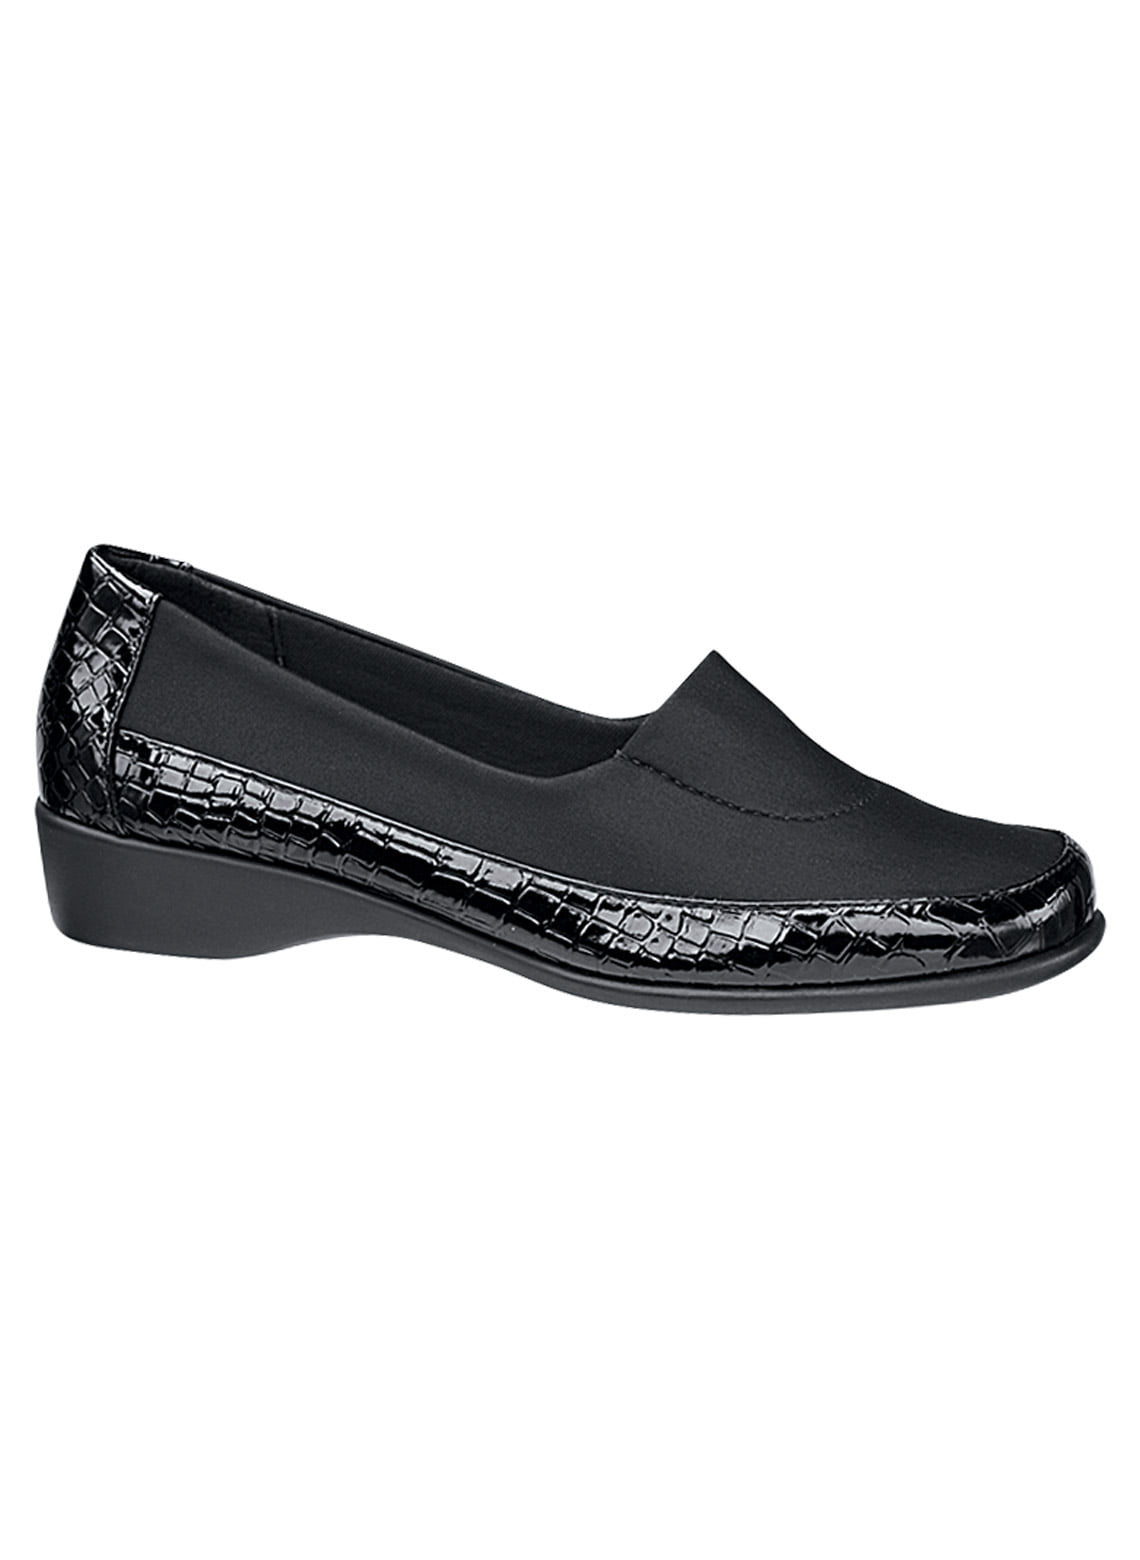 Details about   Girls Black Slip On School Shoes Faux Leather Wedge Loafers Kids Low Wedge Pumps 